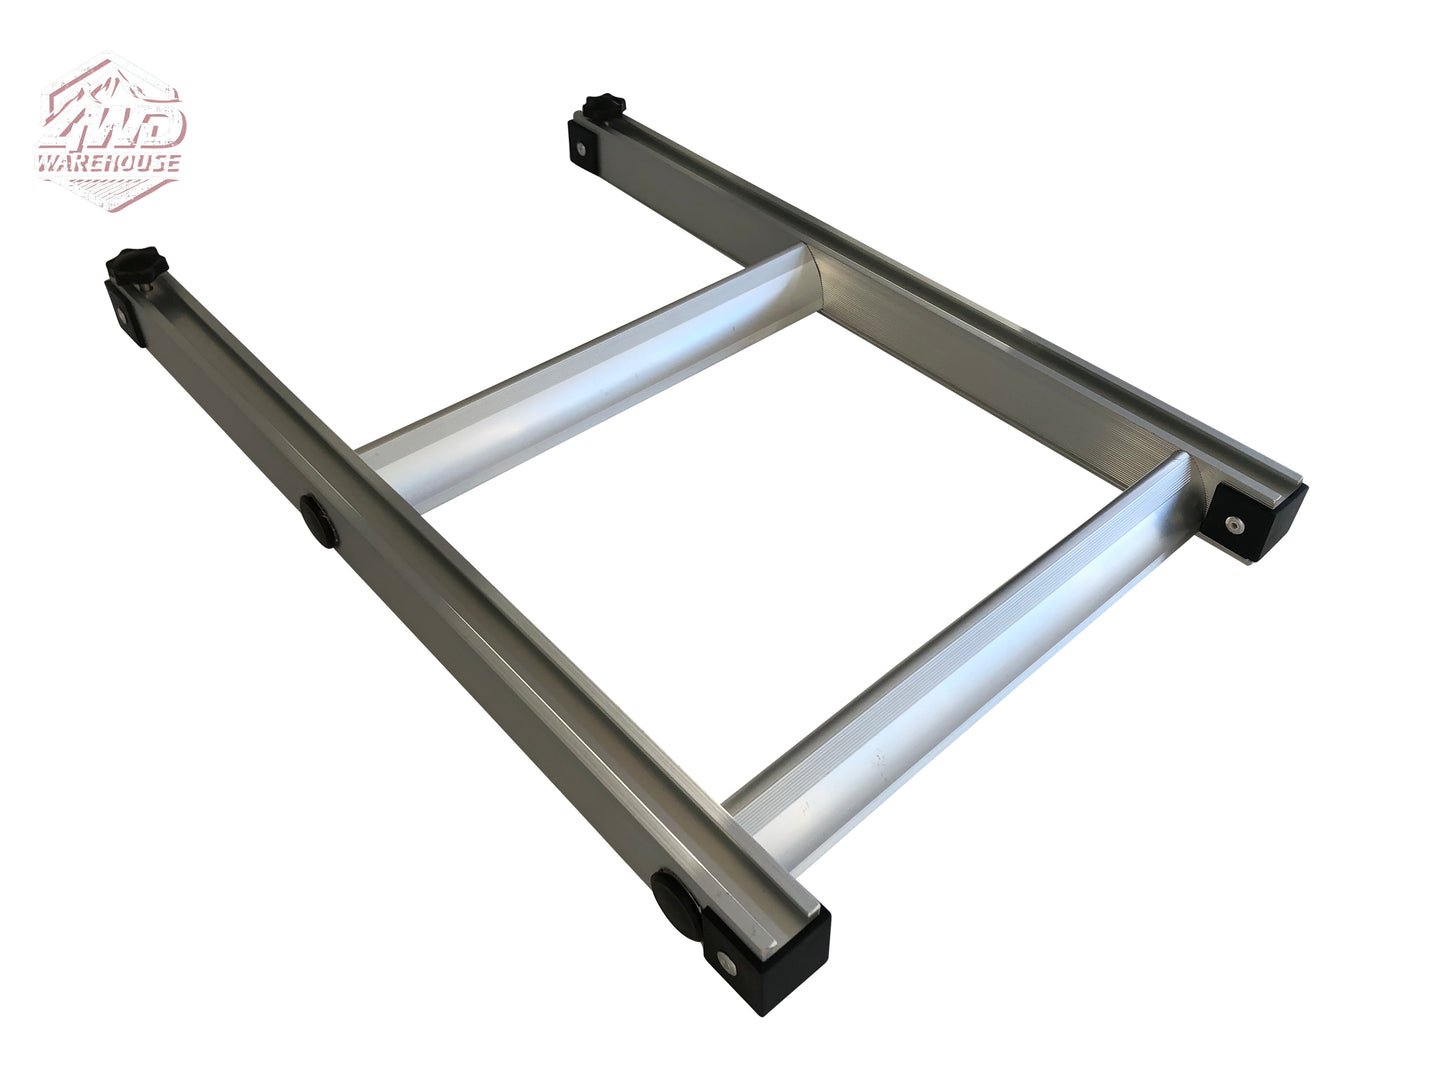 RMR Ladder extension for Rooftop tent